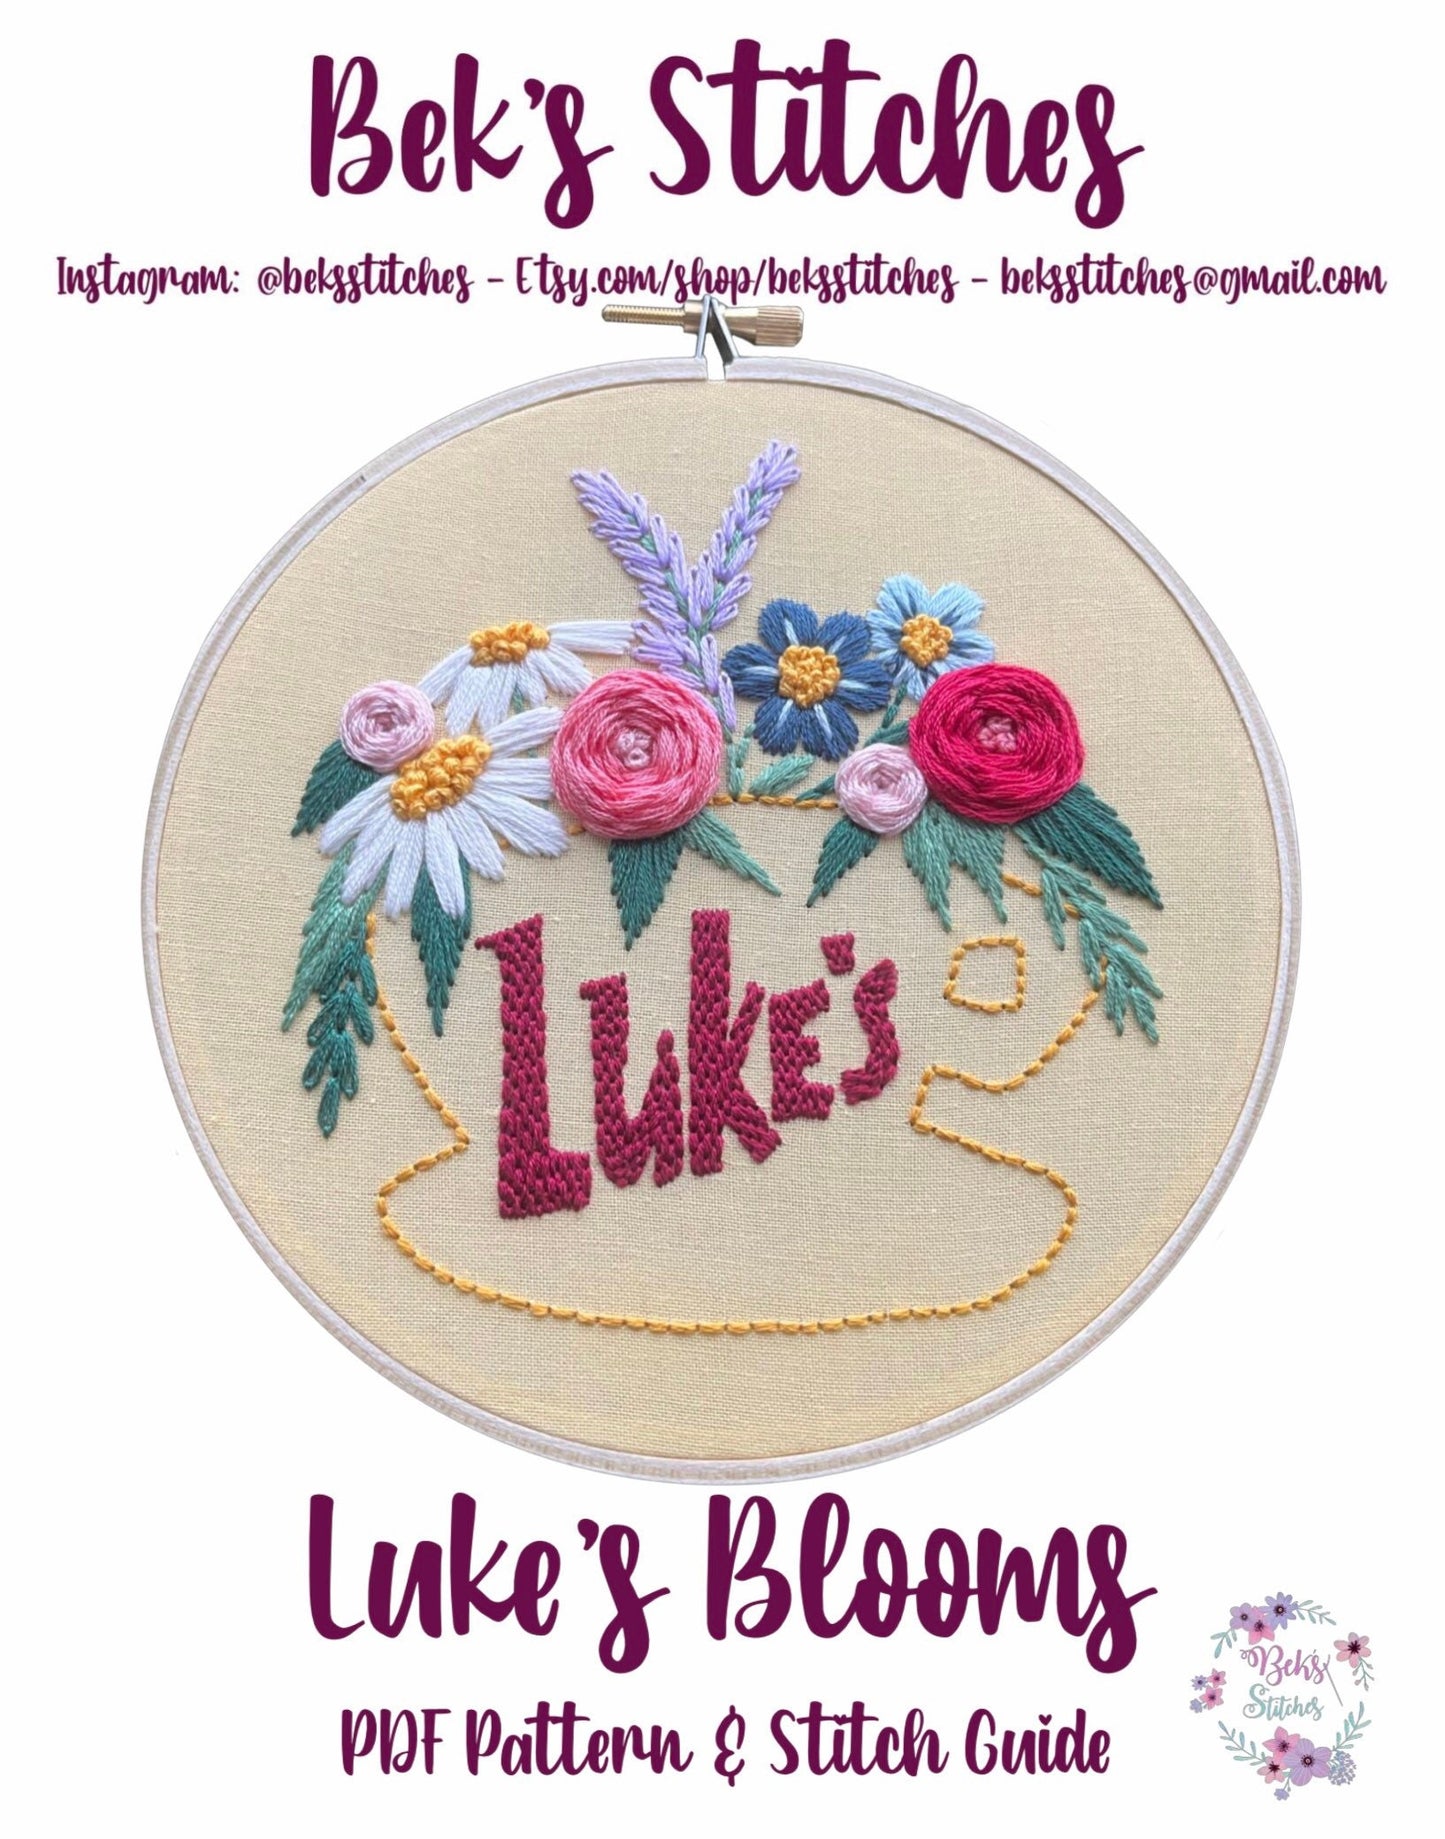 BUNDLE PDF Patterns, Gilmore Girls GG Collection - Embroidery Patterns